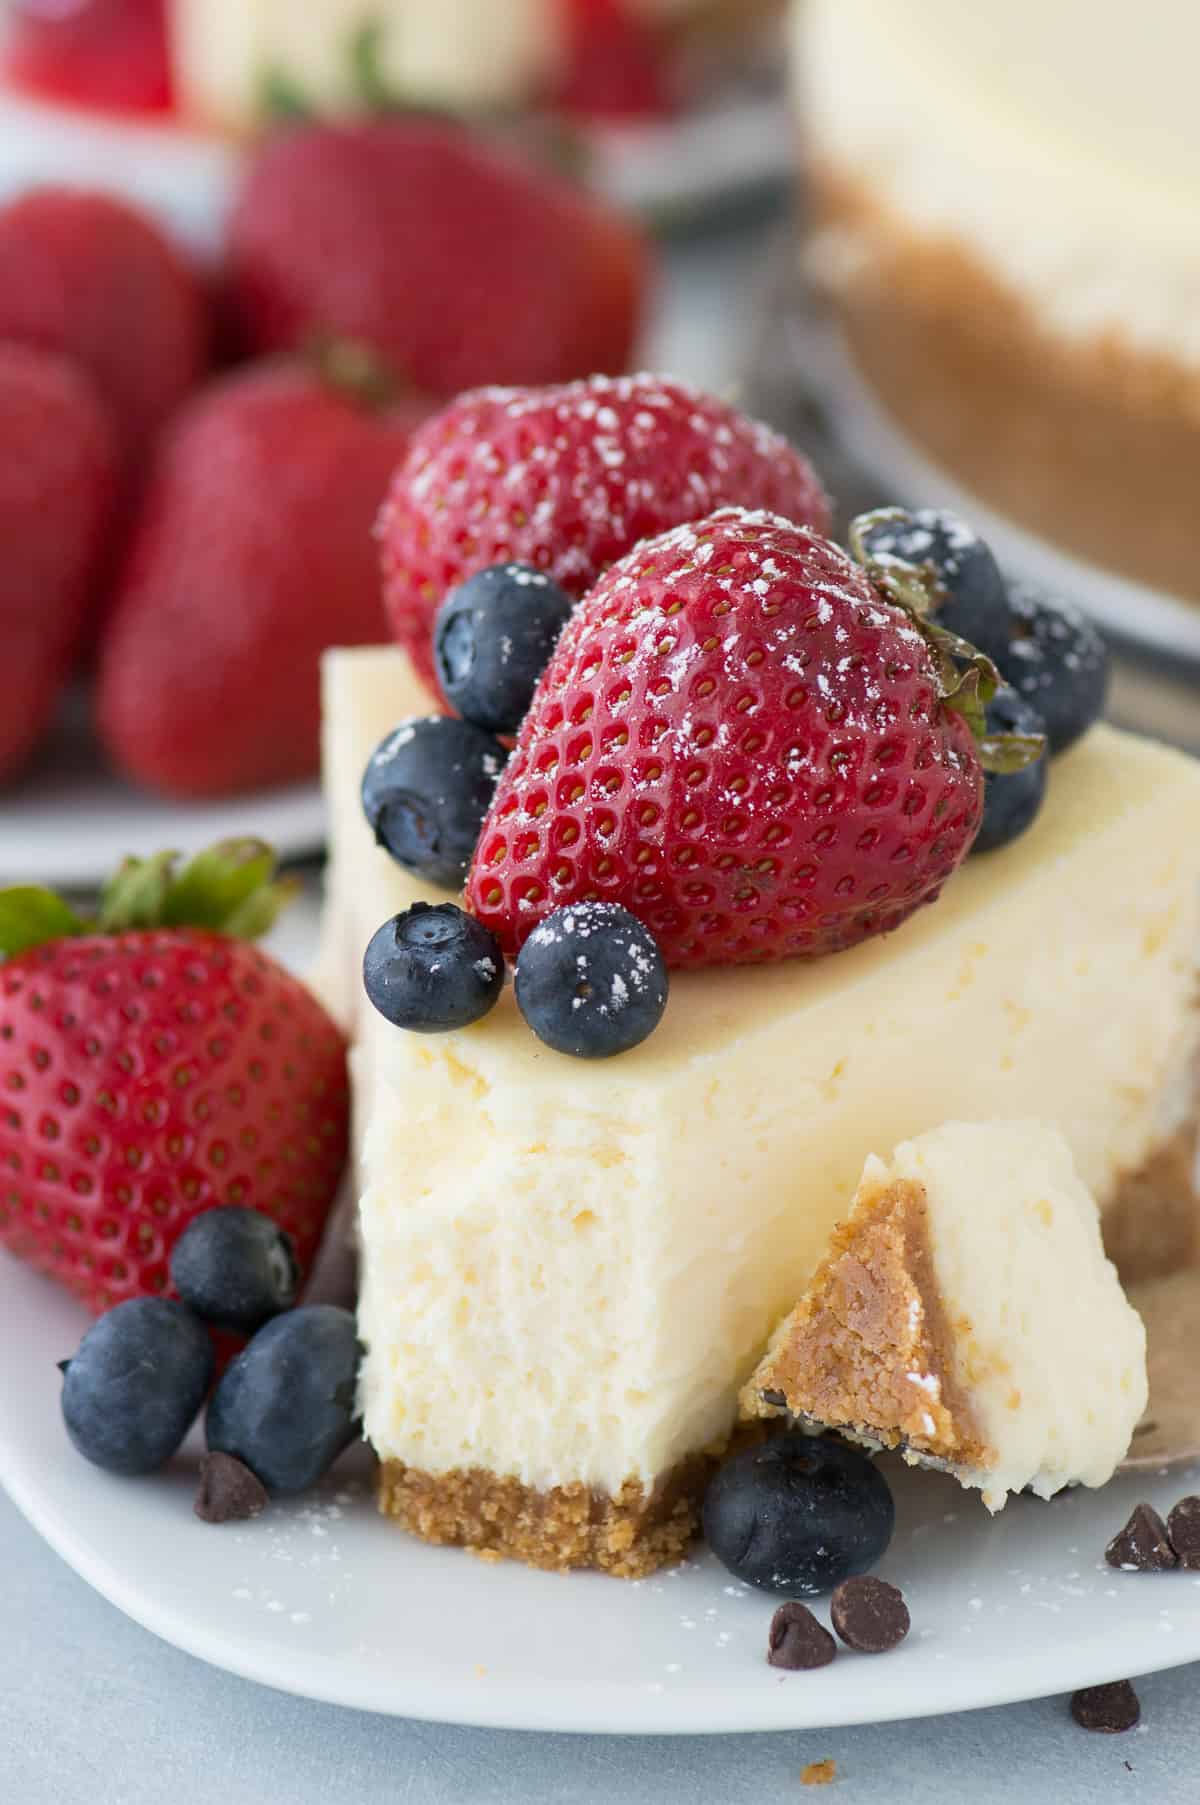 slice of classic plain cheesecake with fruit on top on white plate